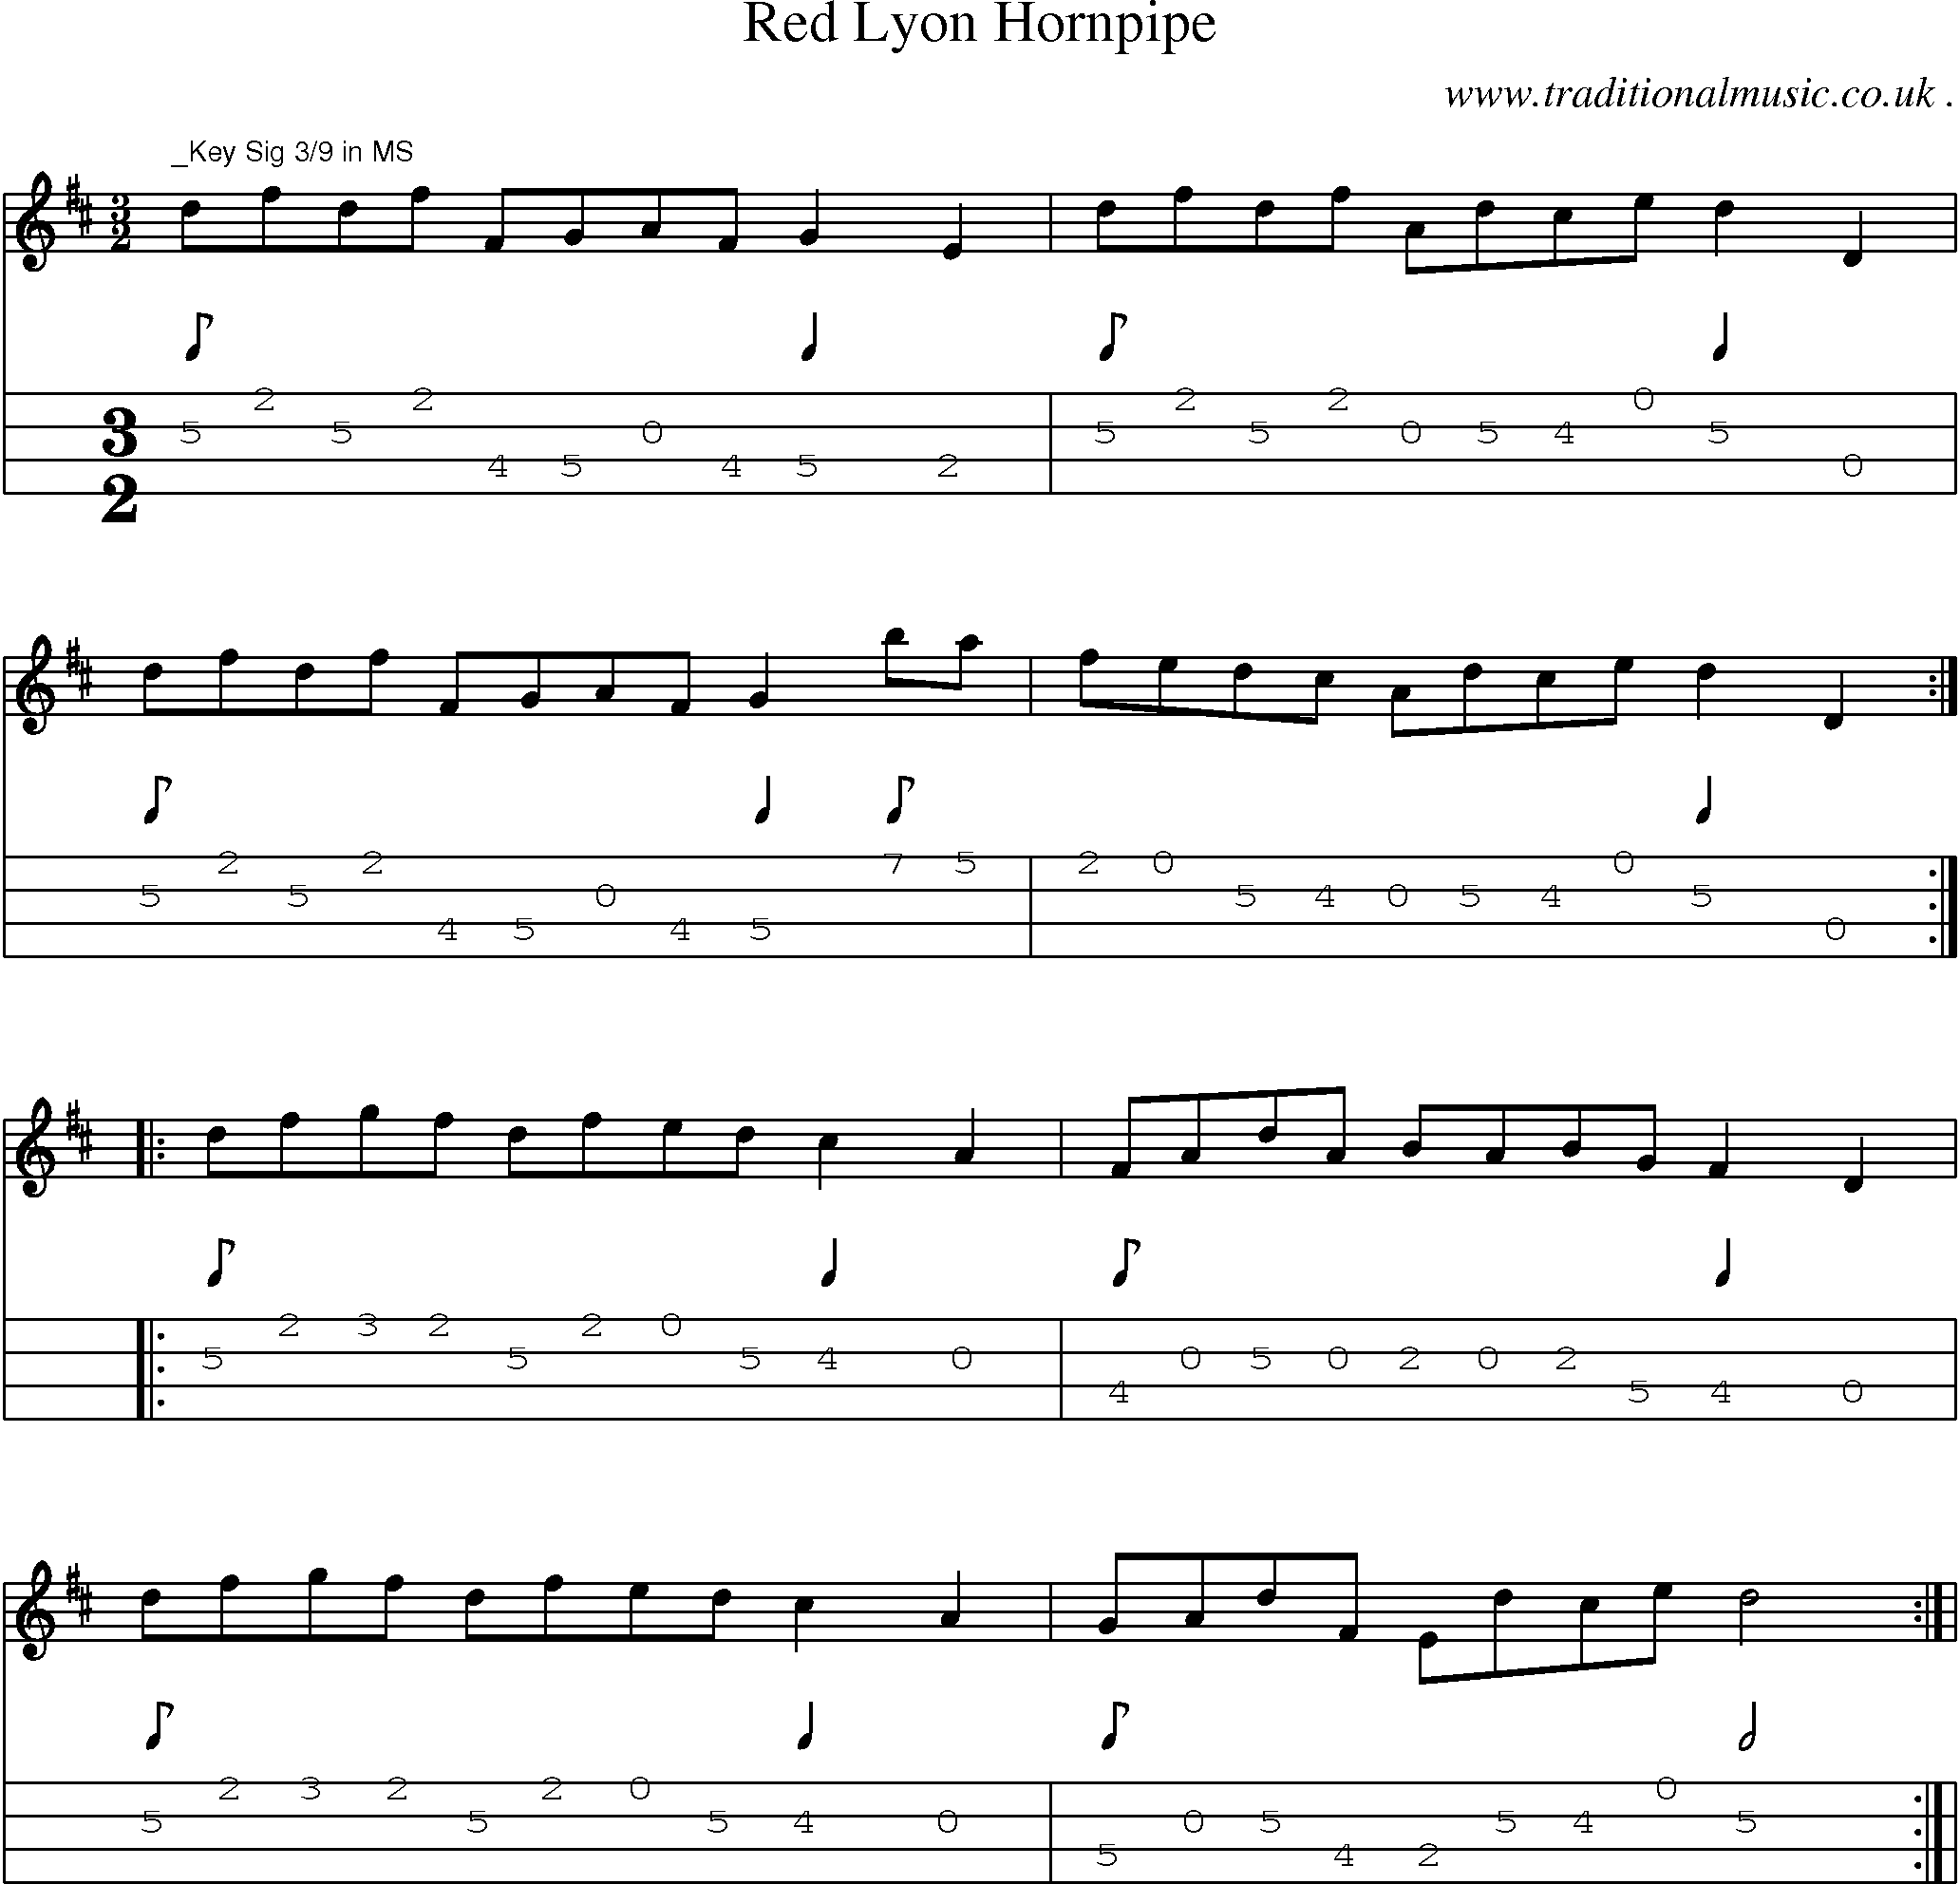 Sheet-Music and Mandolin Tabs for Red Lyon Hornpipe